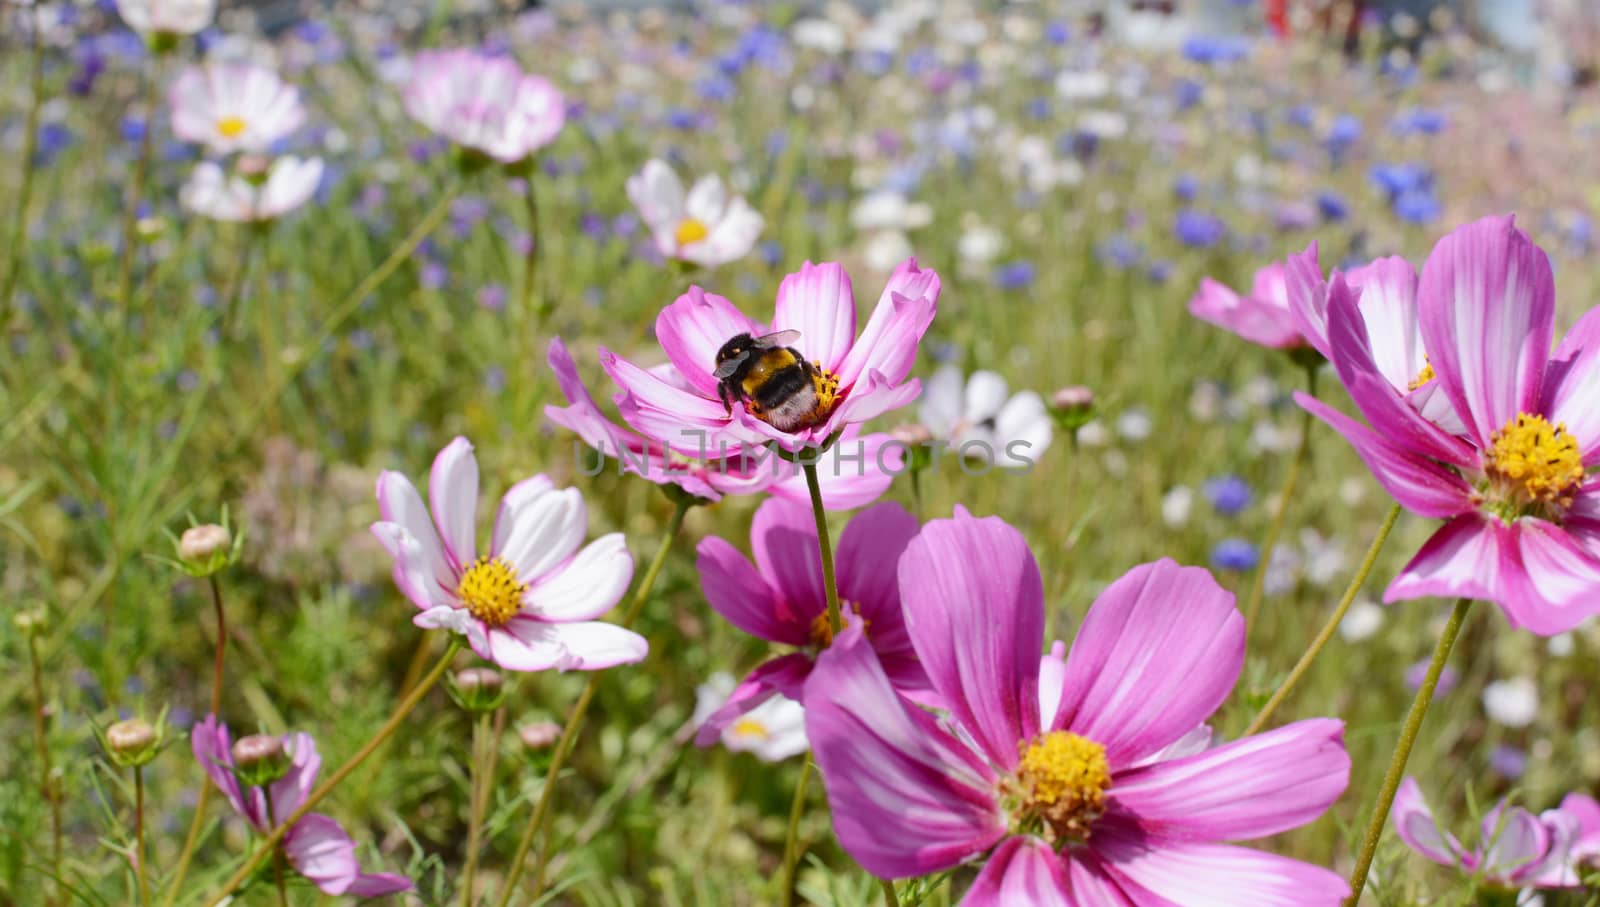 Bumble bee taking nectar from Cosmos flowers by sarahdoow